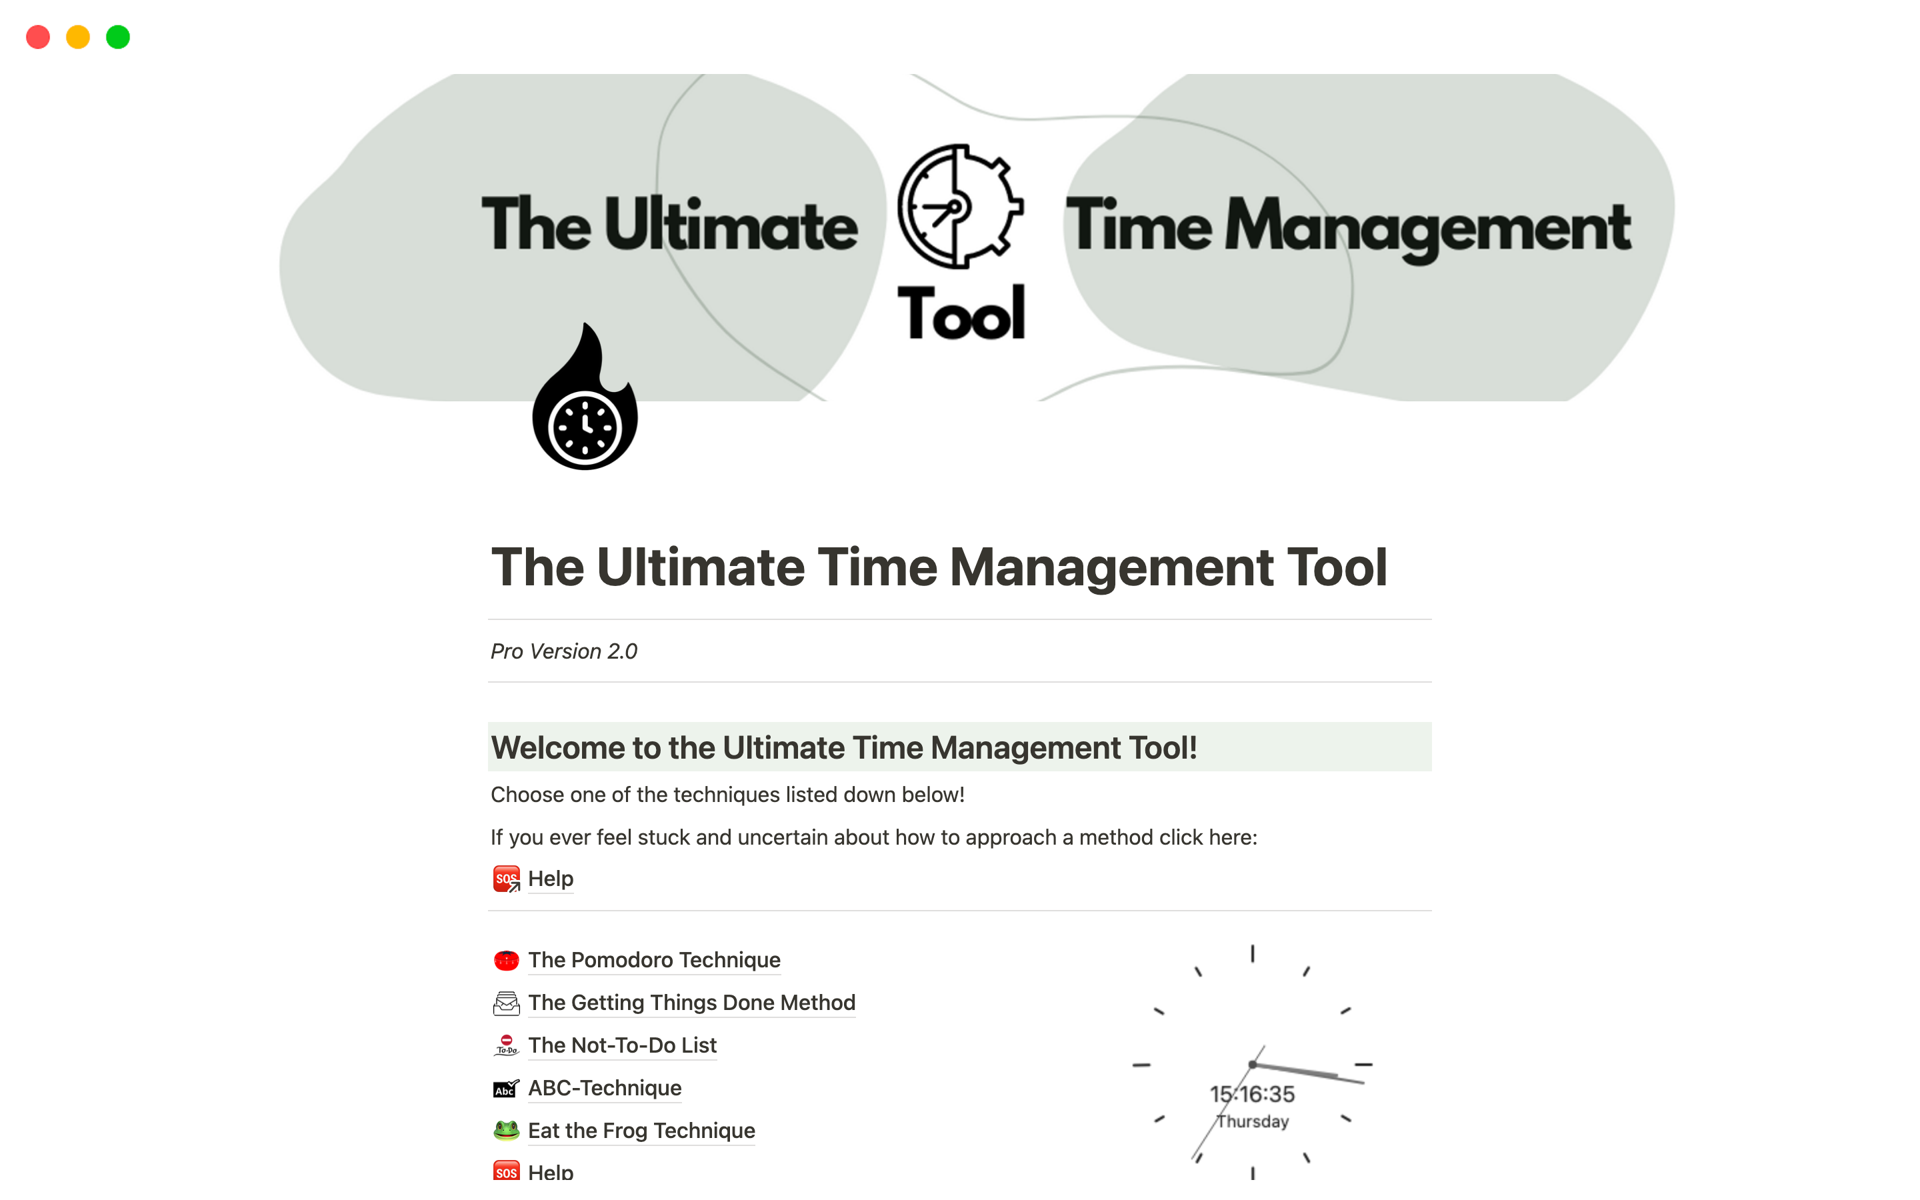 This Template helps you manage your time better with 3 different time management methods!